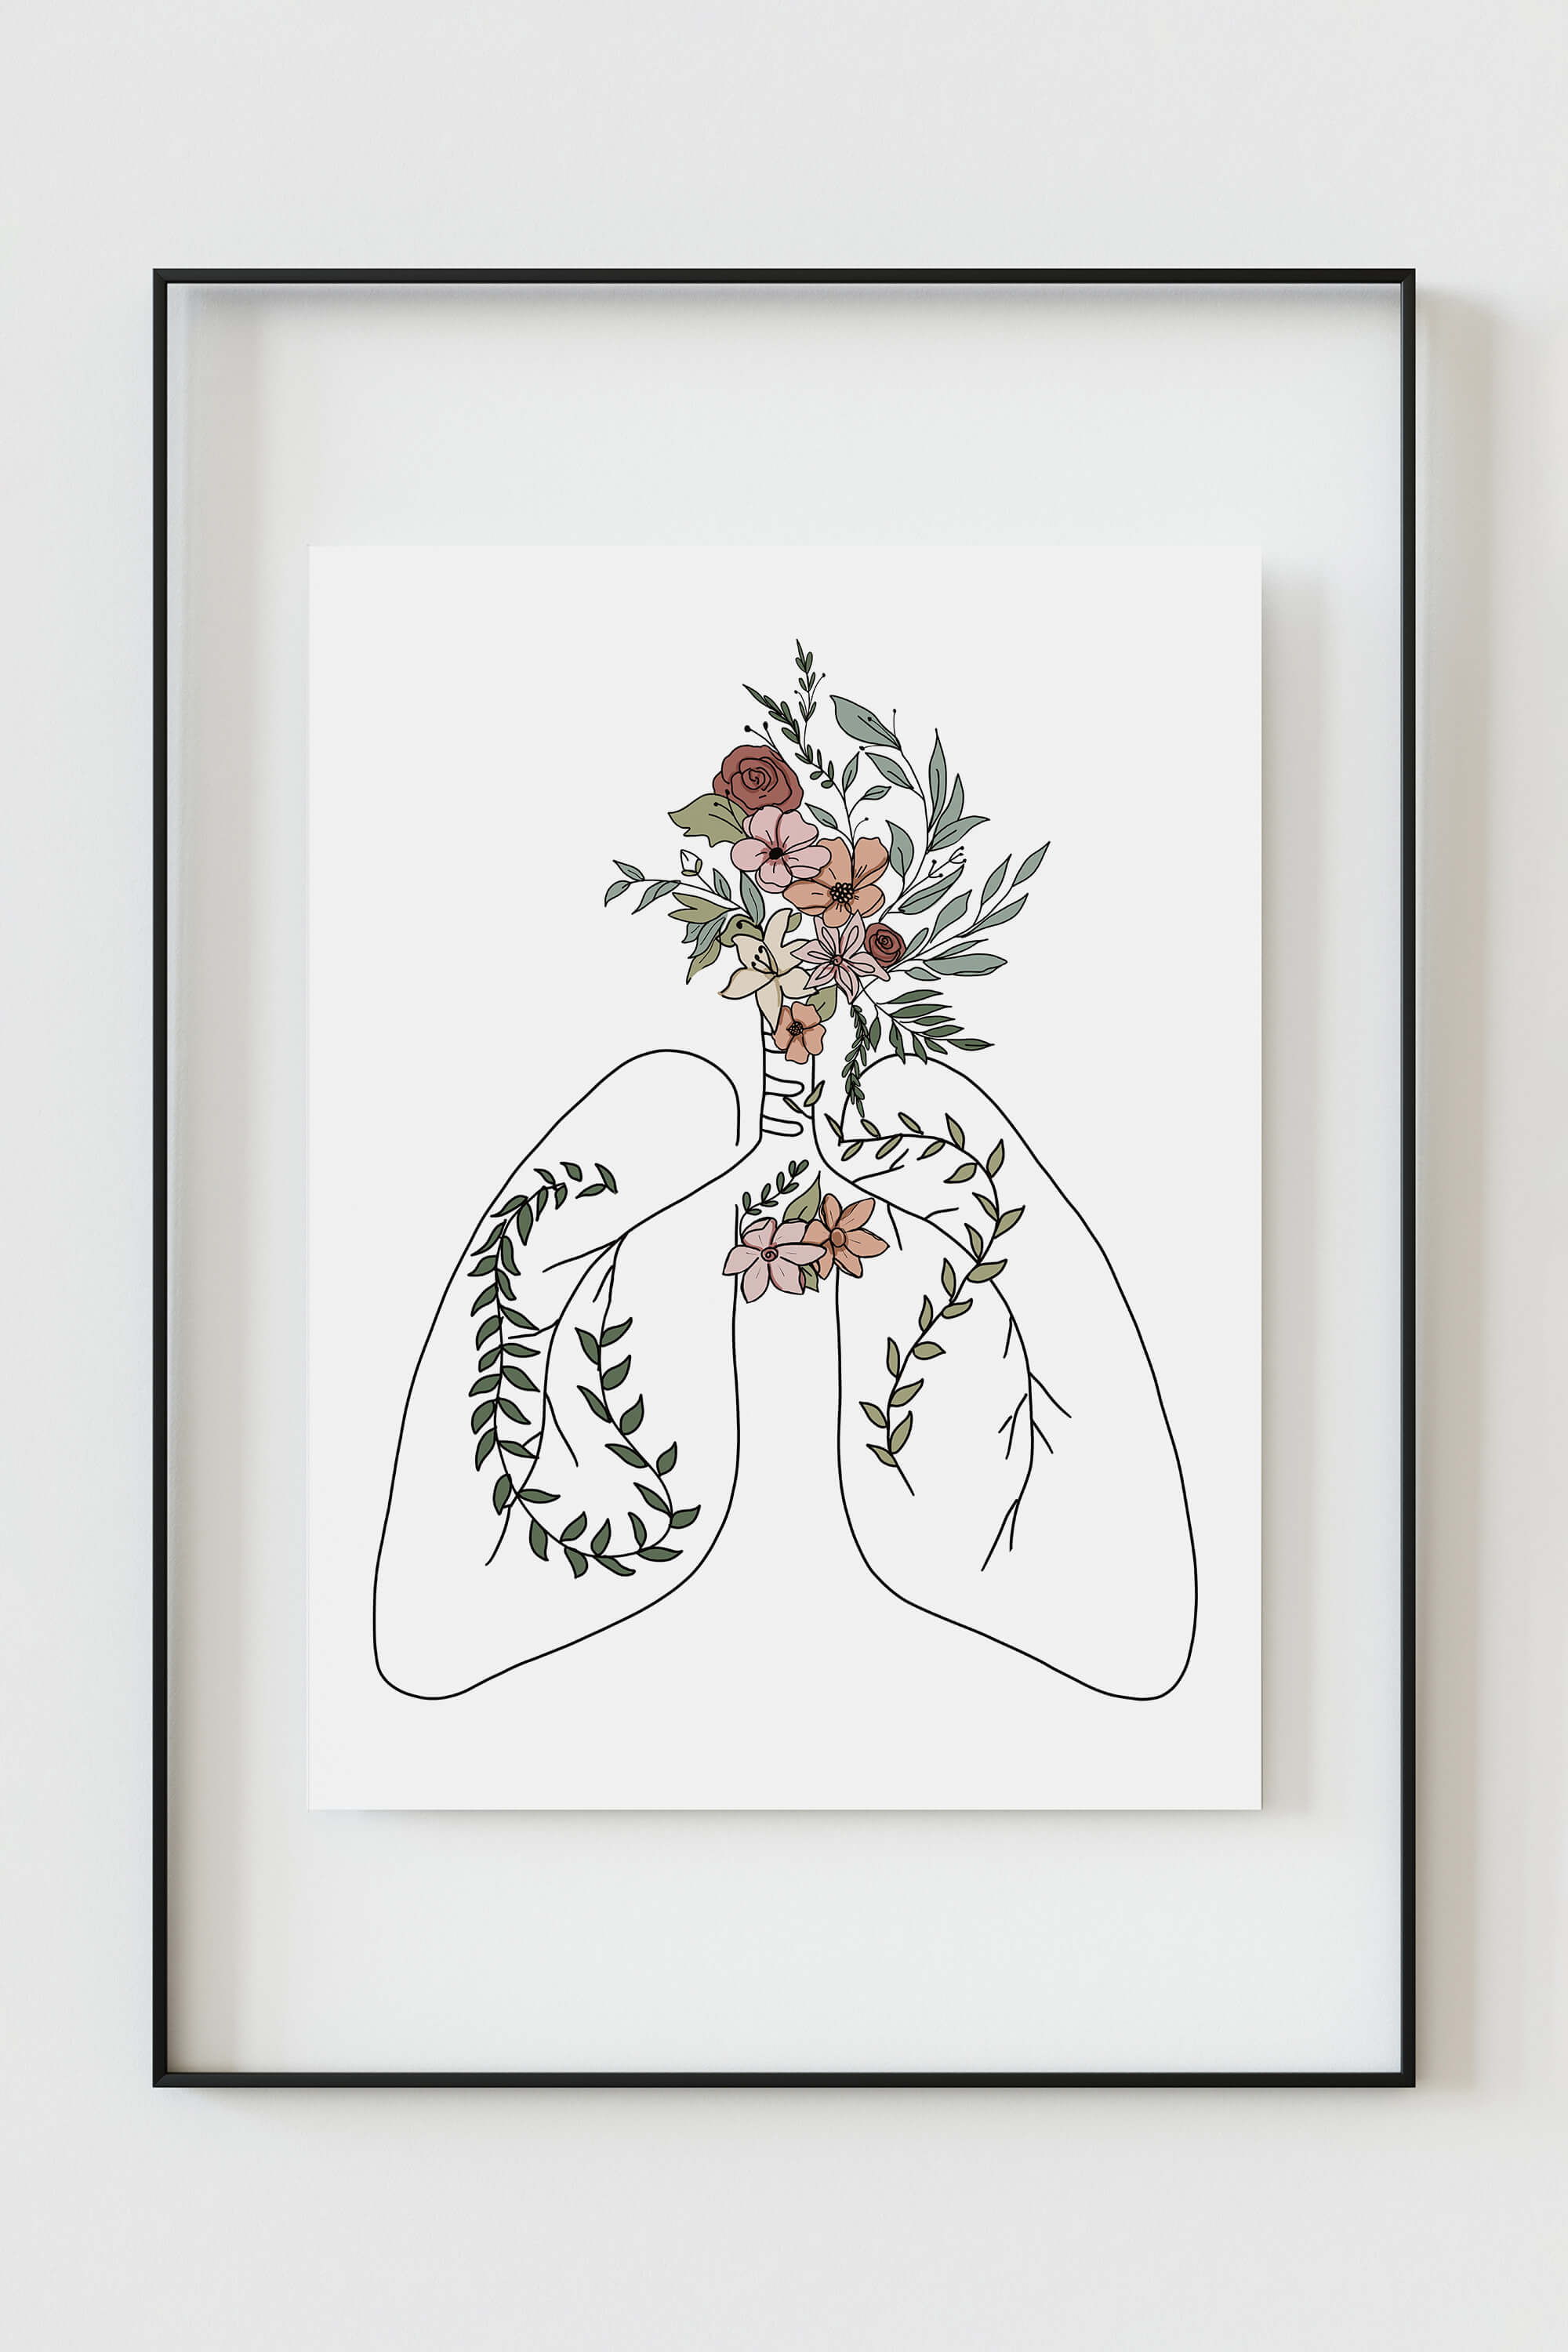 Unique Anatomy Wall Art featuring lungs with floral embellishments, symbolizing hope and recovery for cancer survivors.